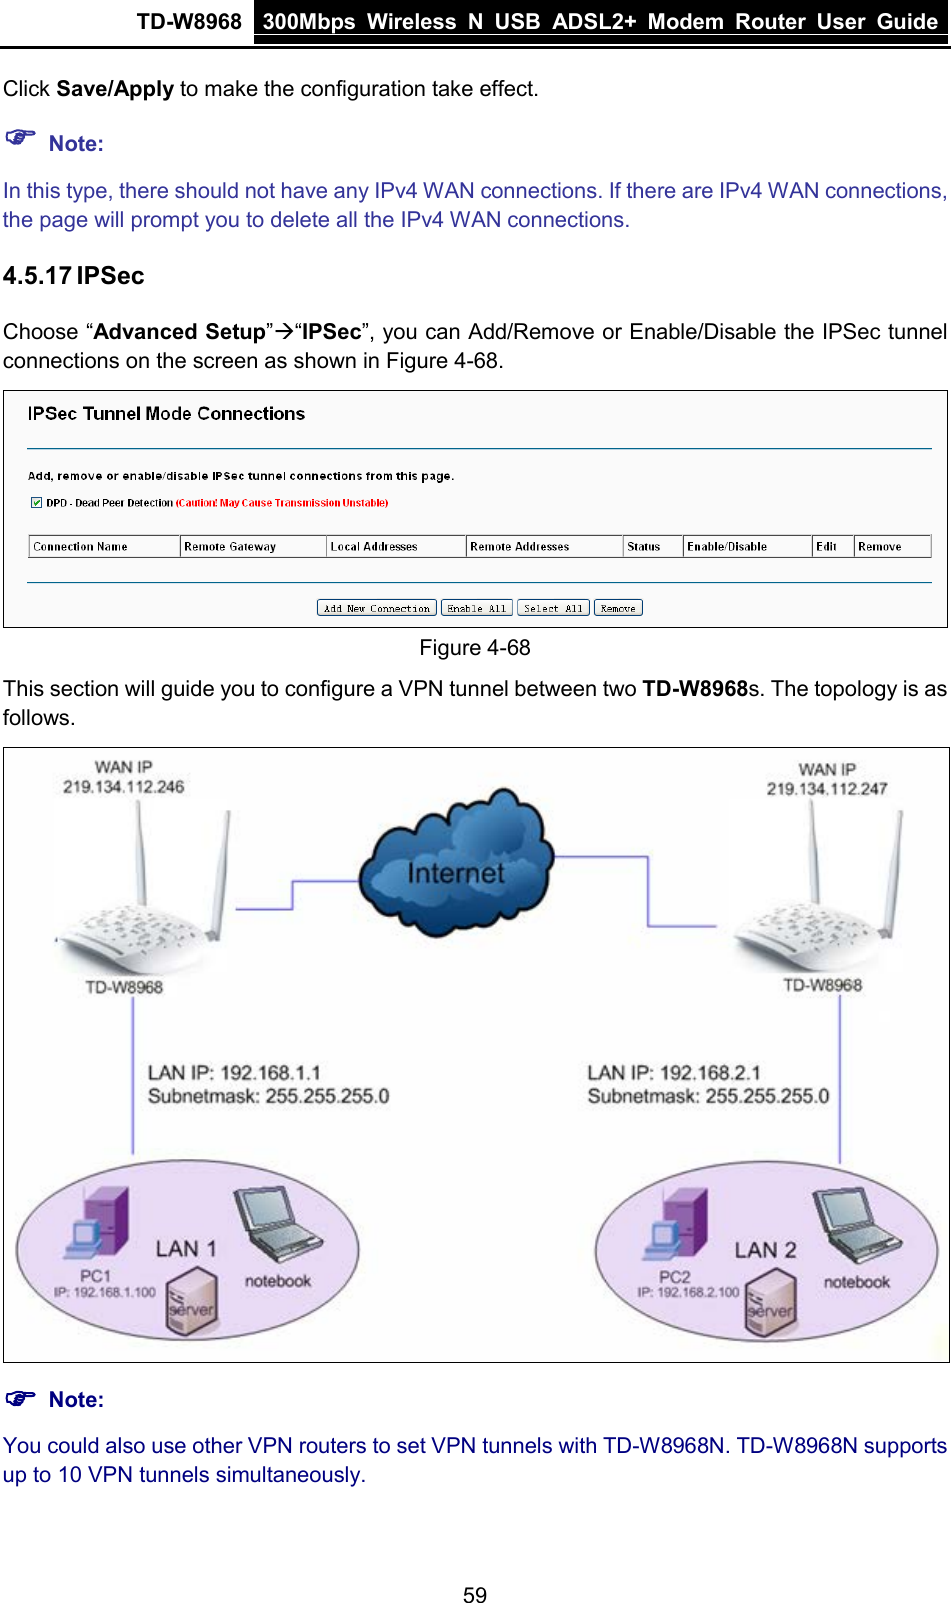 TD-W8968 300Mbps Wireless  N  USB ADSL2+ Modem Router  User Guide  Click Save/Apply to make the configuration take effect.  Note: In this type, there should not have any IPv4 WAN connections. If there are IPv4 WAN connections, the page will prompt you to delete all the IPv4 WAN connections. 4.5.17 IPSec Choose “Advanced Setup”“IPSec”, you can Add/Remove or Enable/Disable the IPSec tunnel connections on the screen as shown in Figure 4-68.    Figure 4-68 This section will guide you to configure a VPN tunnel between two TD-W8968s. The topology is as follows.   Note: You could also use other VPN routers to set VPN tunnels with TD-W8968N. TD-W8968N supports up to 10 VPN tunnels simultaneously. 59 